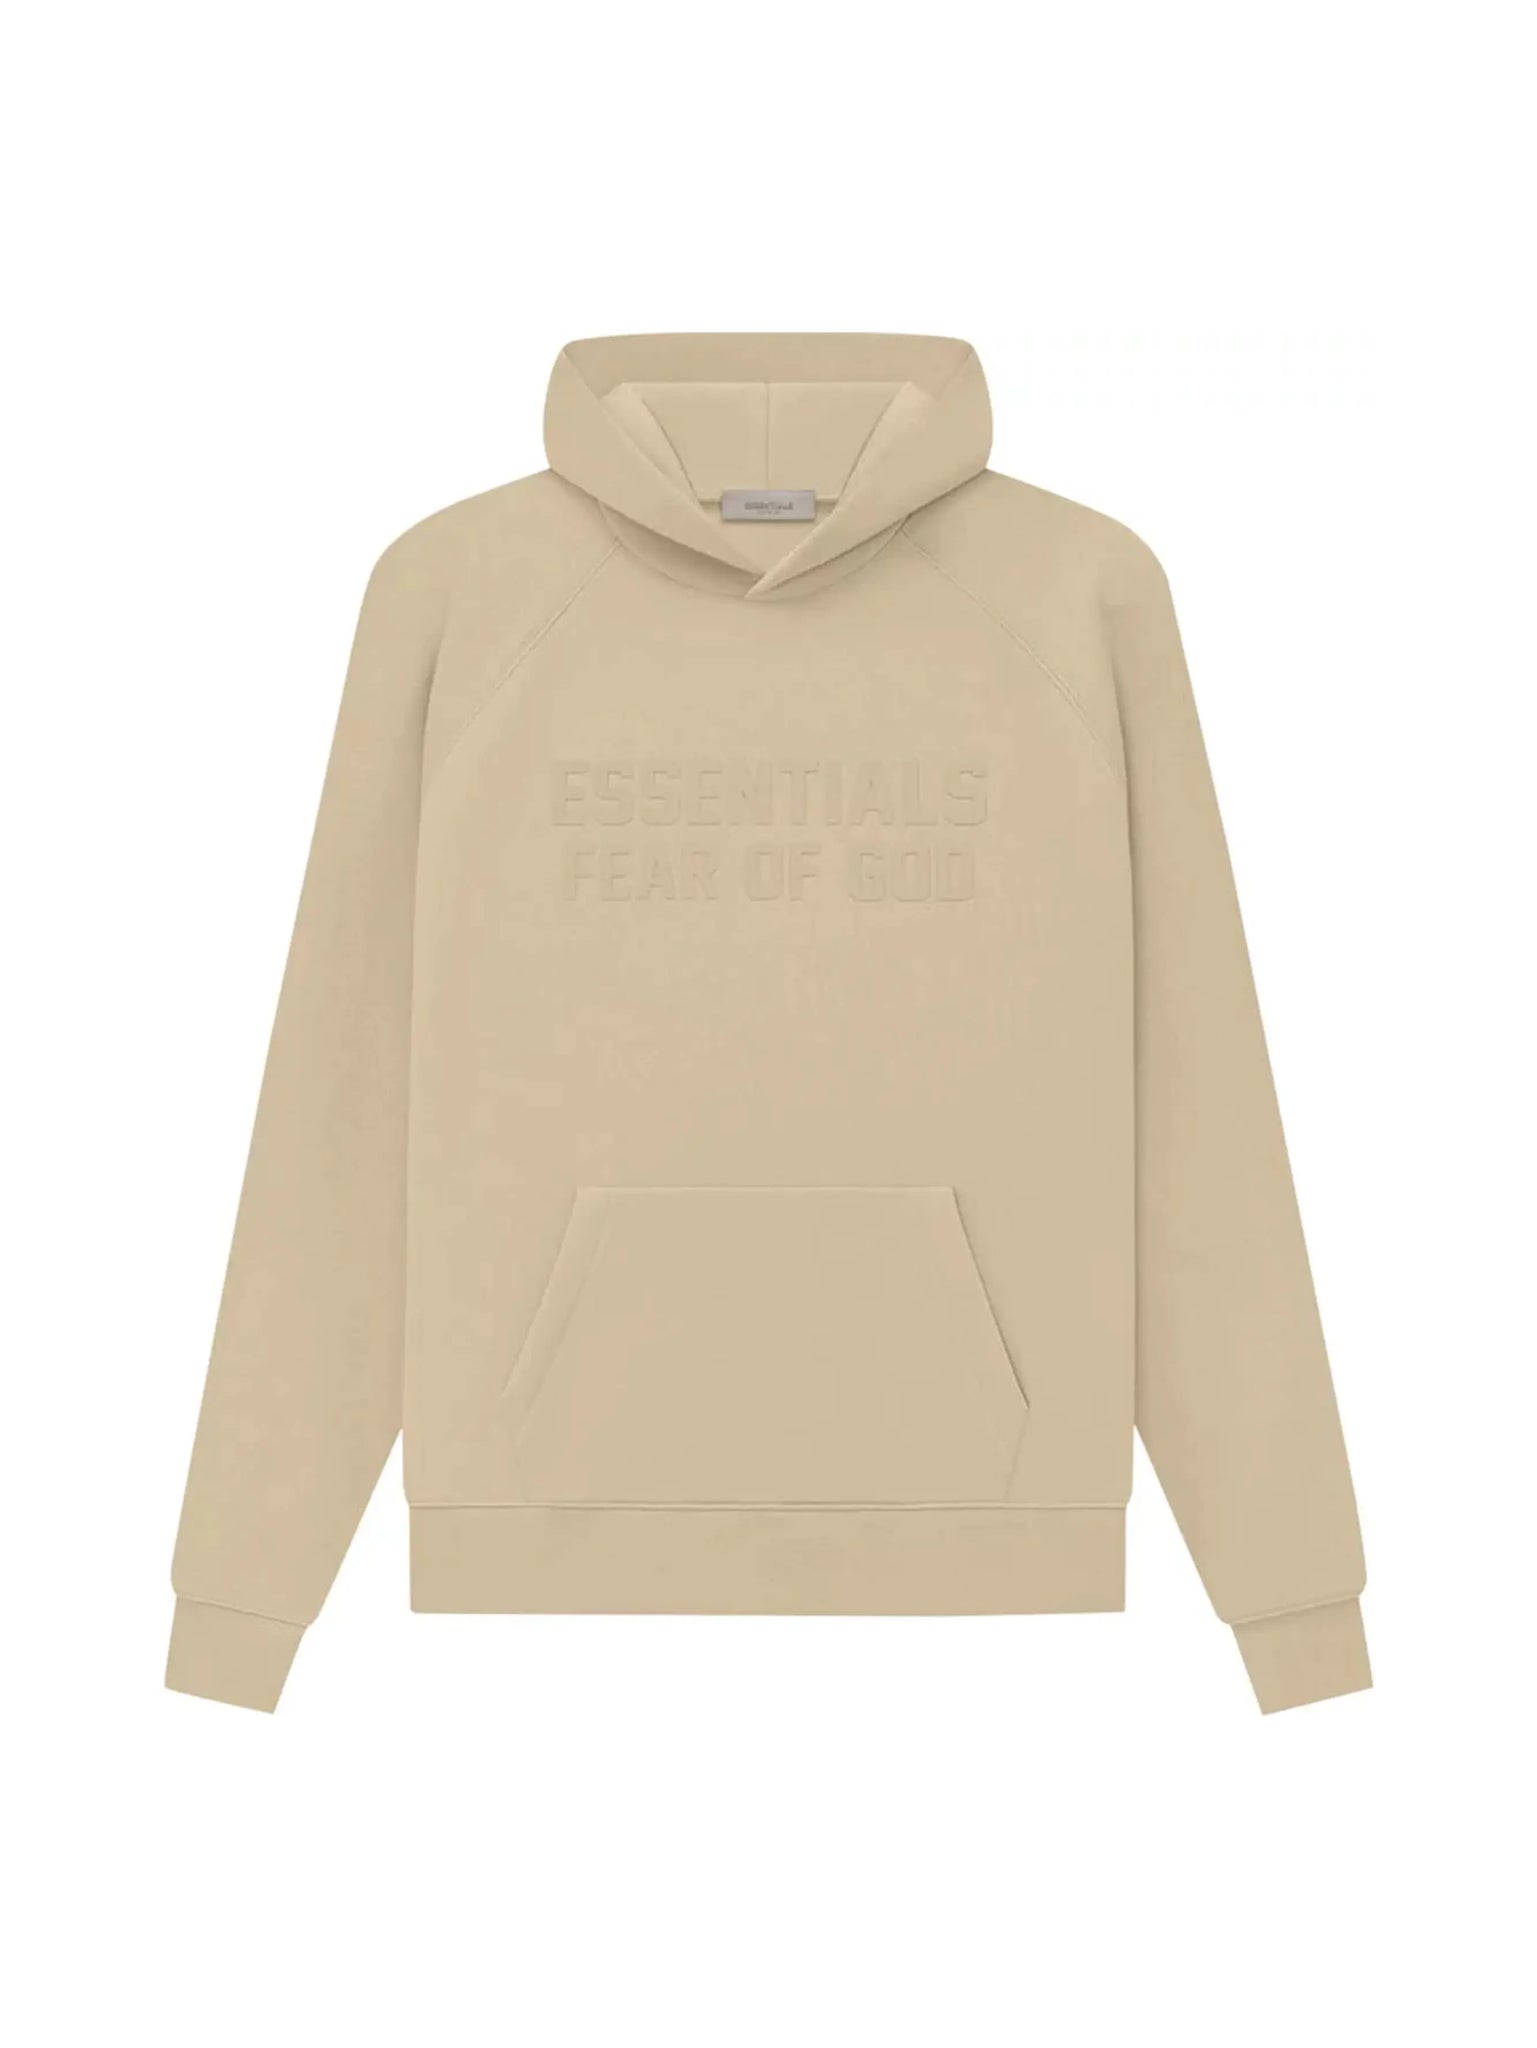 Fear of God Essentials Hoodie Sand (SS23) in Auckland, New Zealand - Shop name